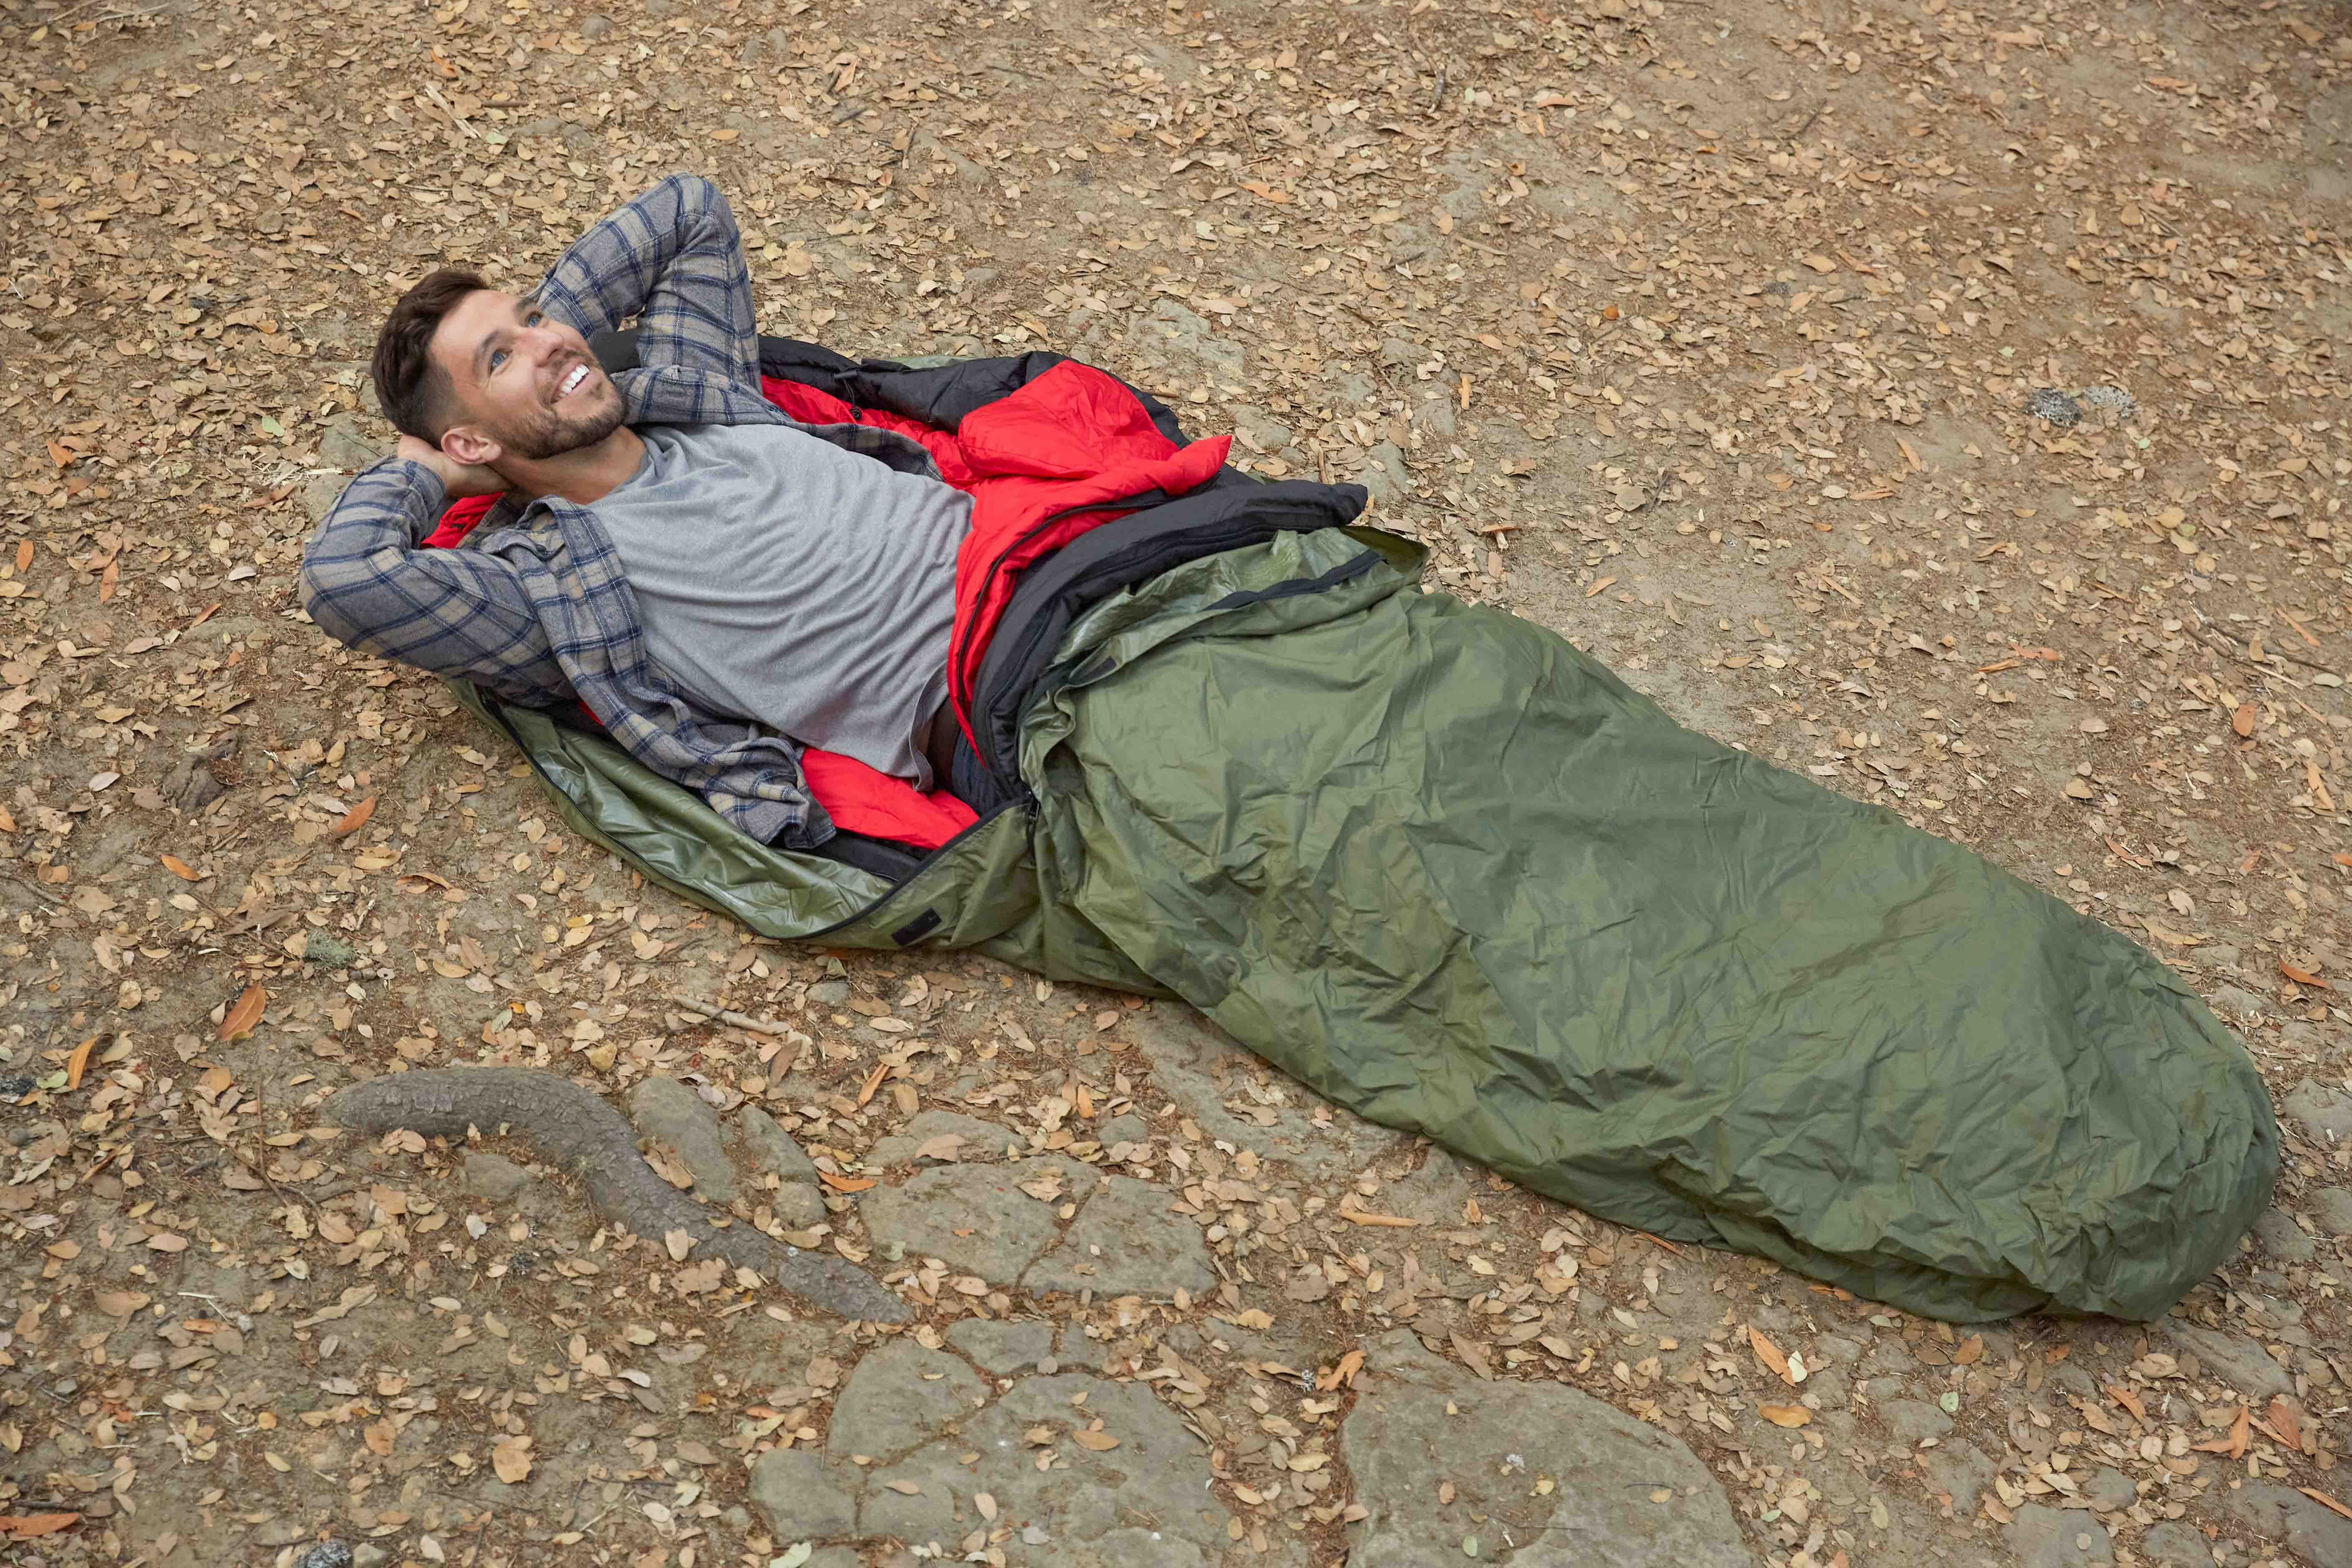 Sleeping Bag Temperature Ratings Explained - Beyond The Tent